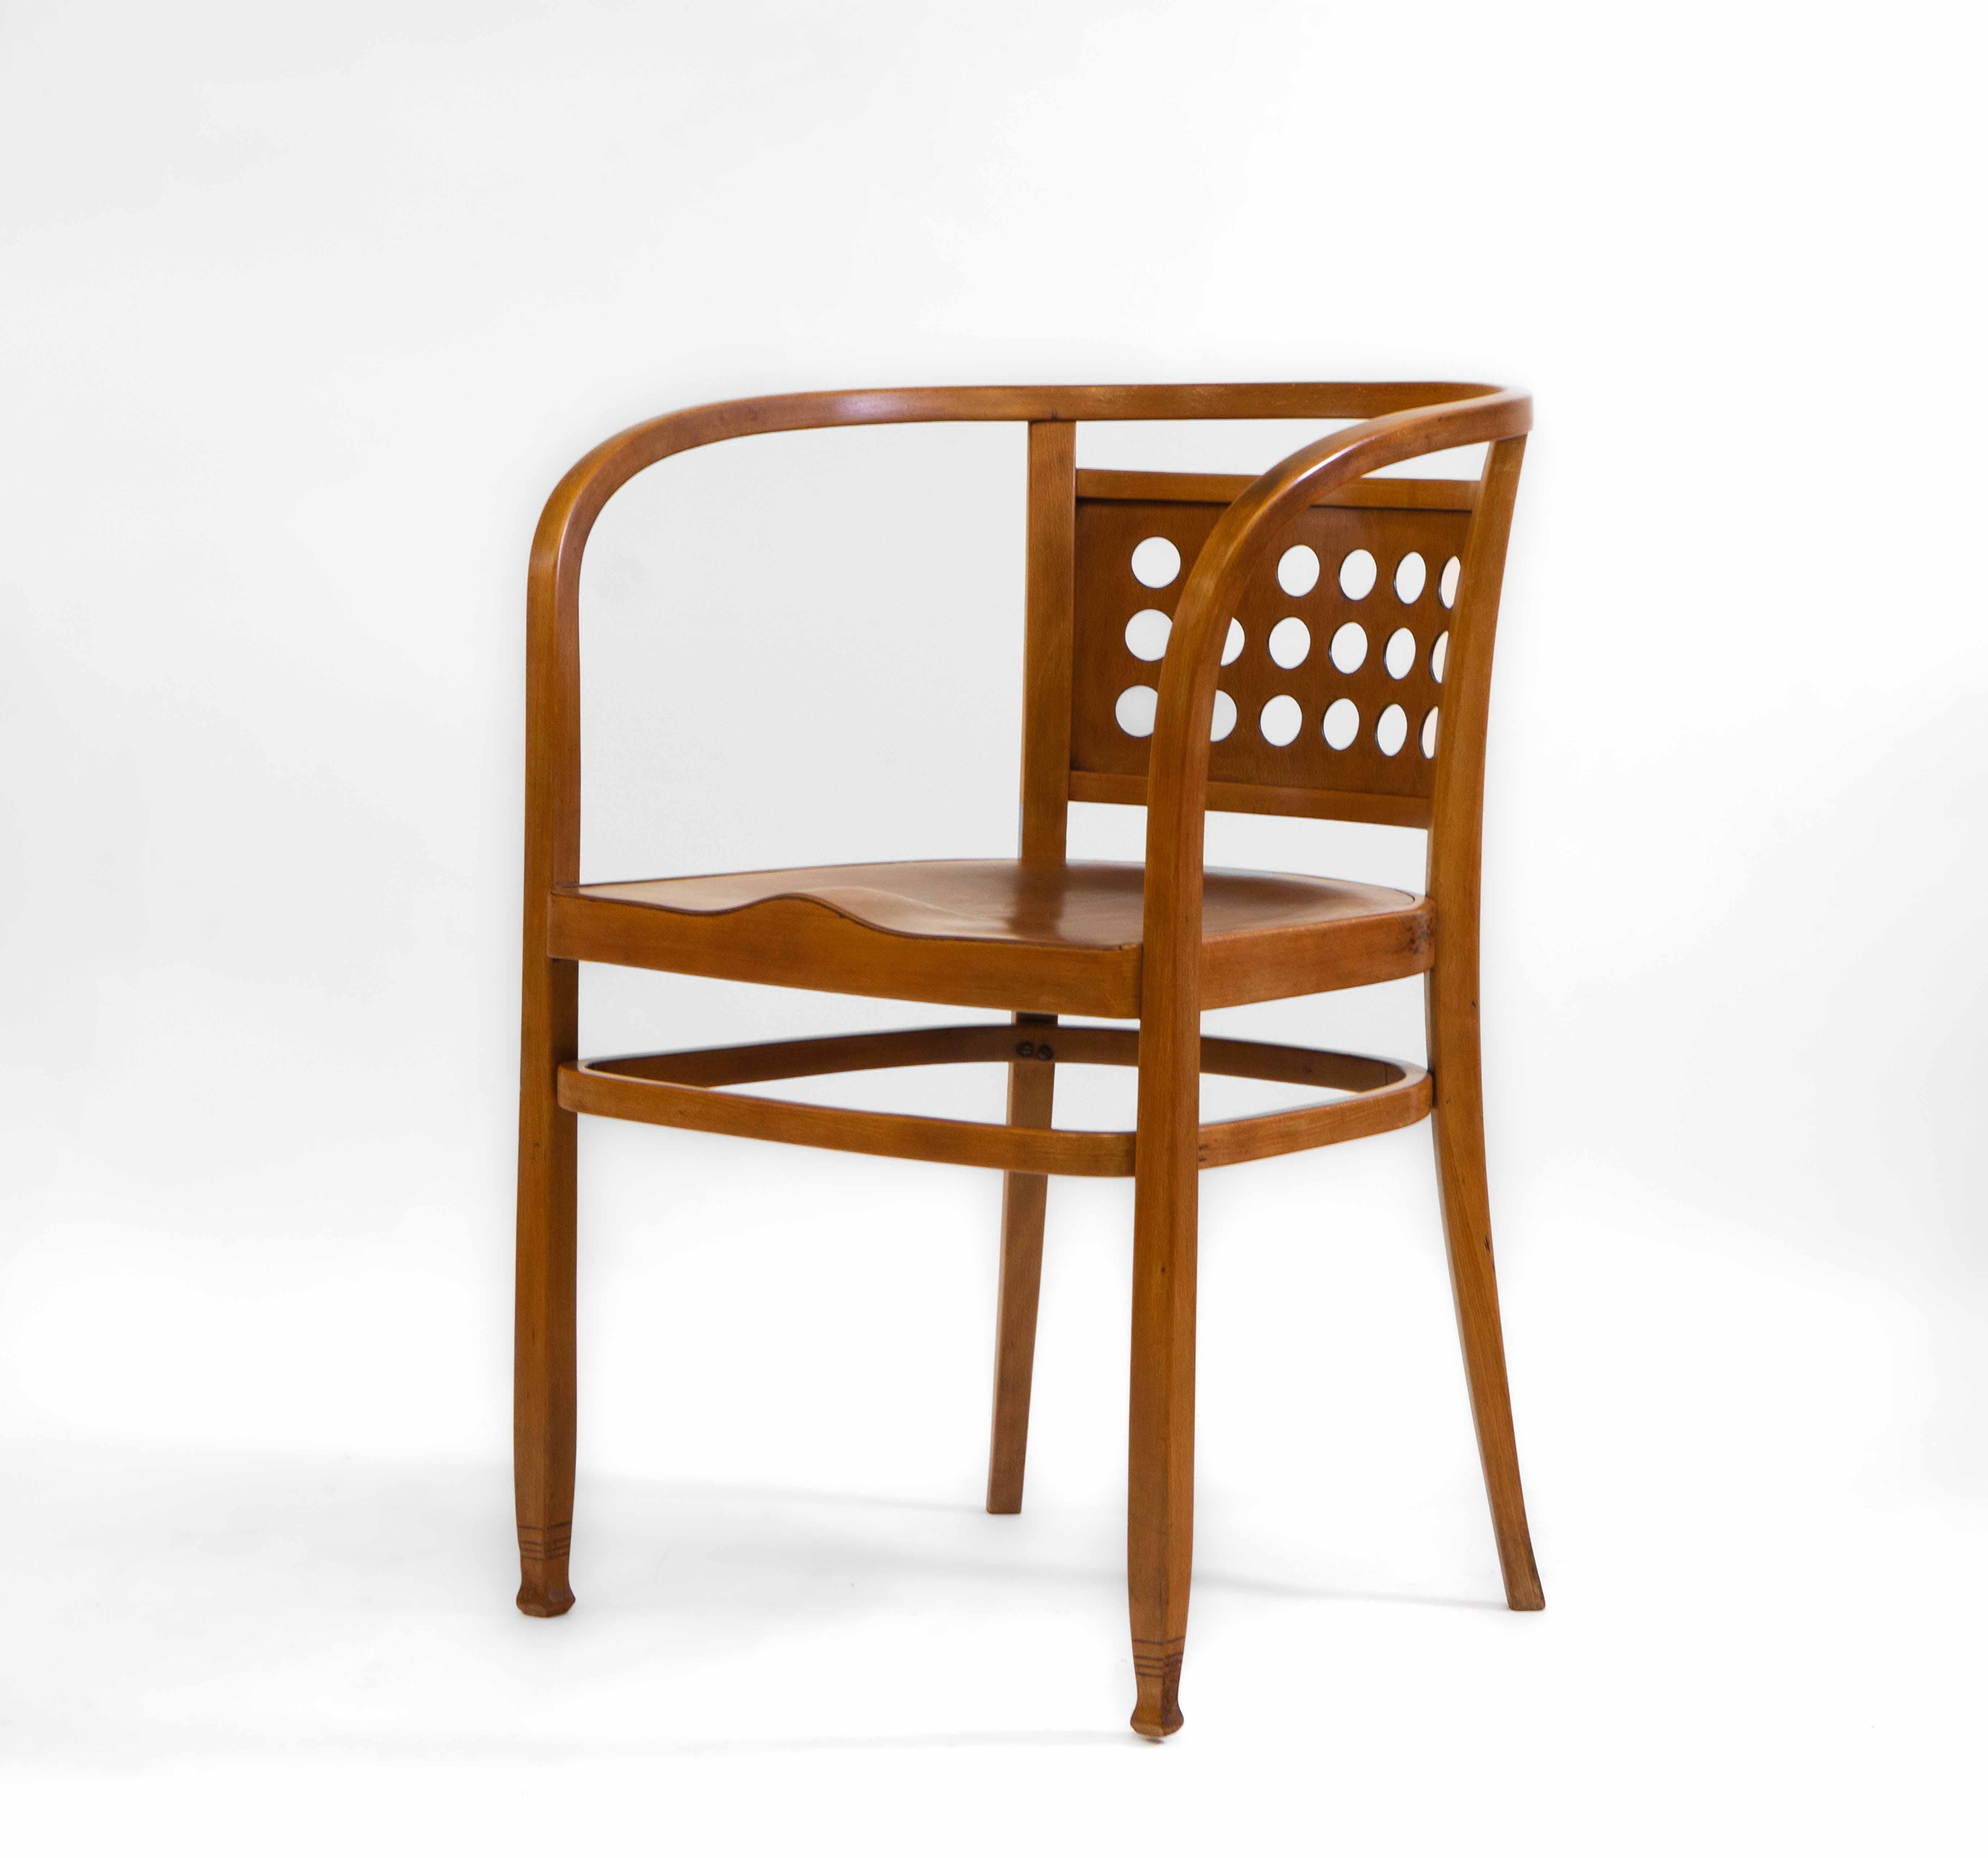 20th Century Vienna Secessionist Bentwood Armchair Designed By Otto Wagner